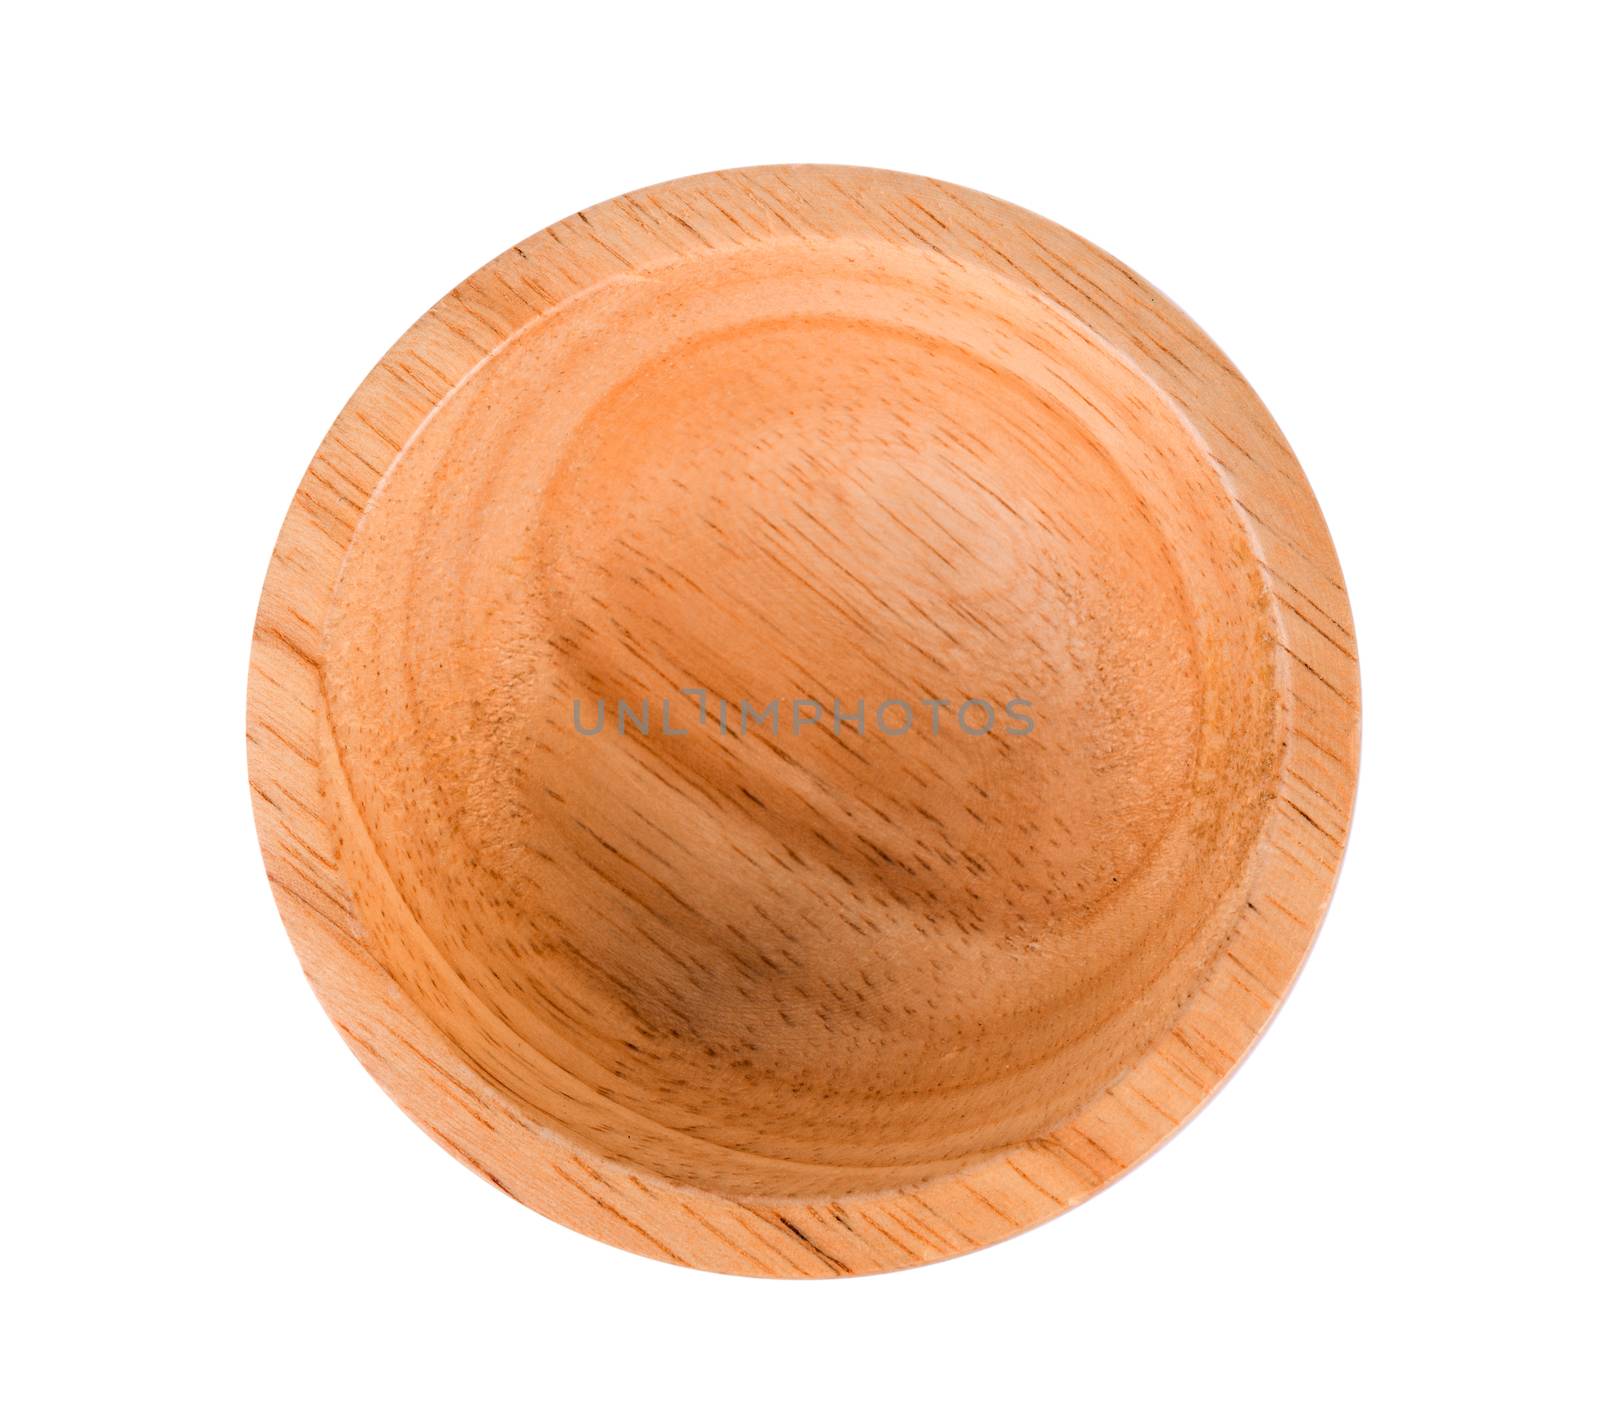 top view wood bowl on white background by sommai